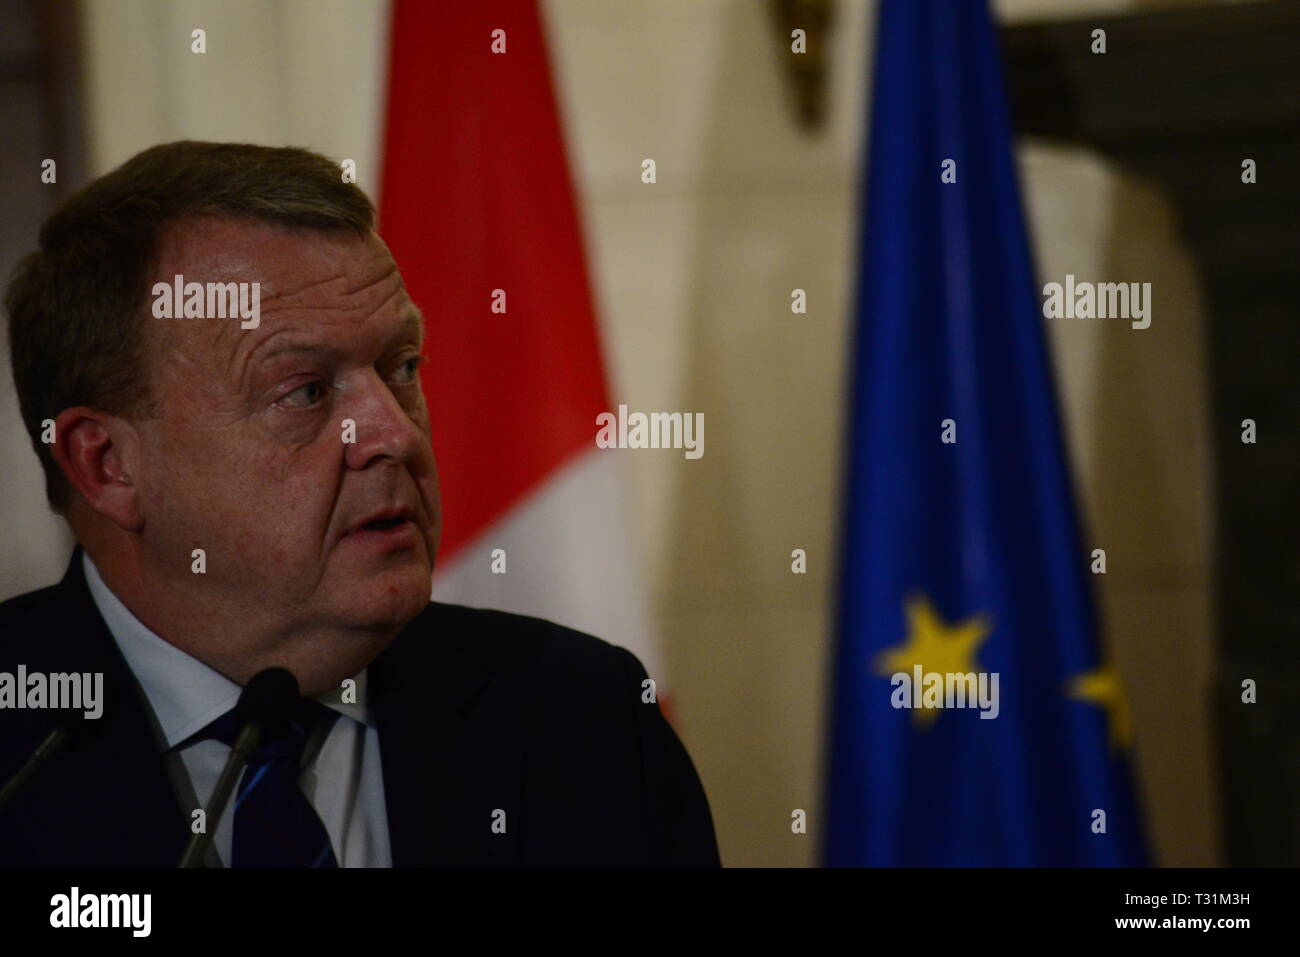 Prime Minister of Denmark, Lars Løkke Rasmussen, during the press conference with Greek Prime Minister Alexis Tsipras. (Photo by Dimitrios Karvountzis/Pacific Press) Stock Photo